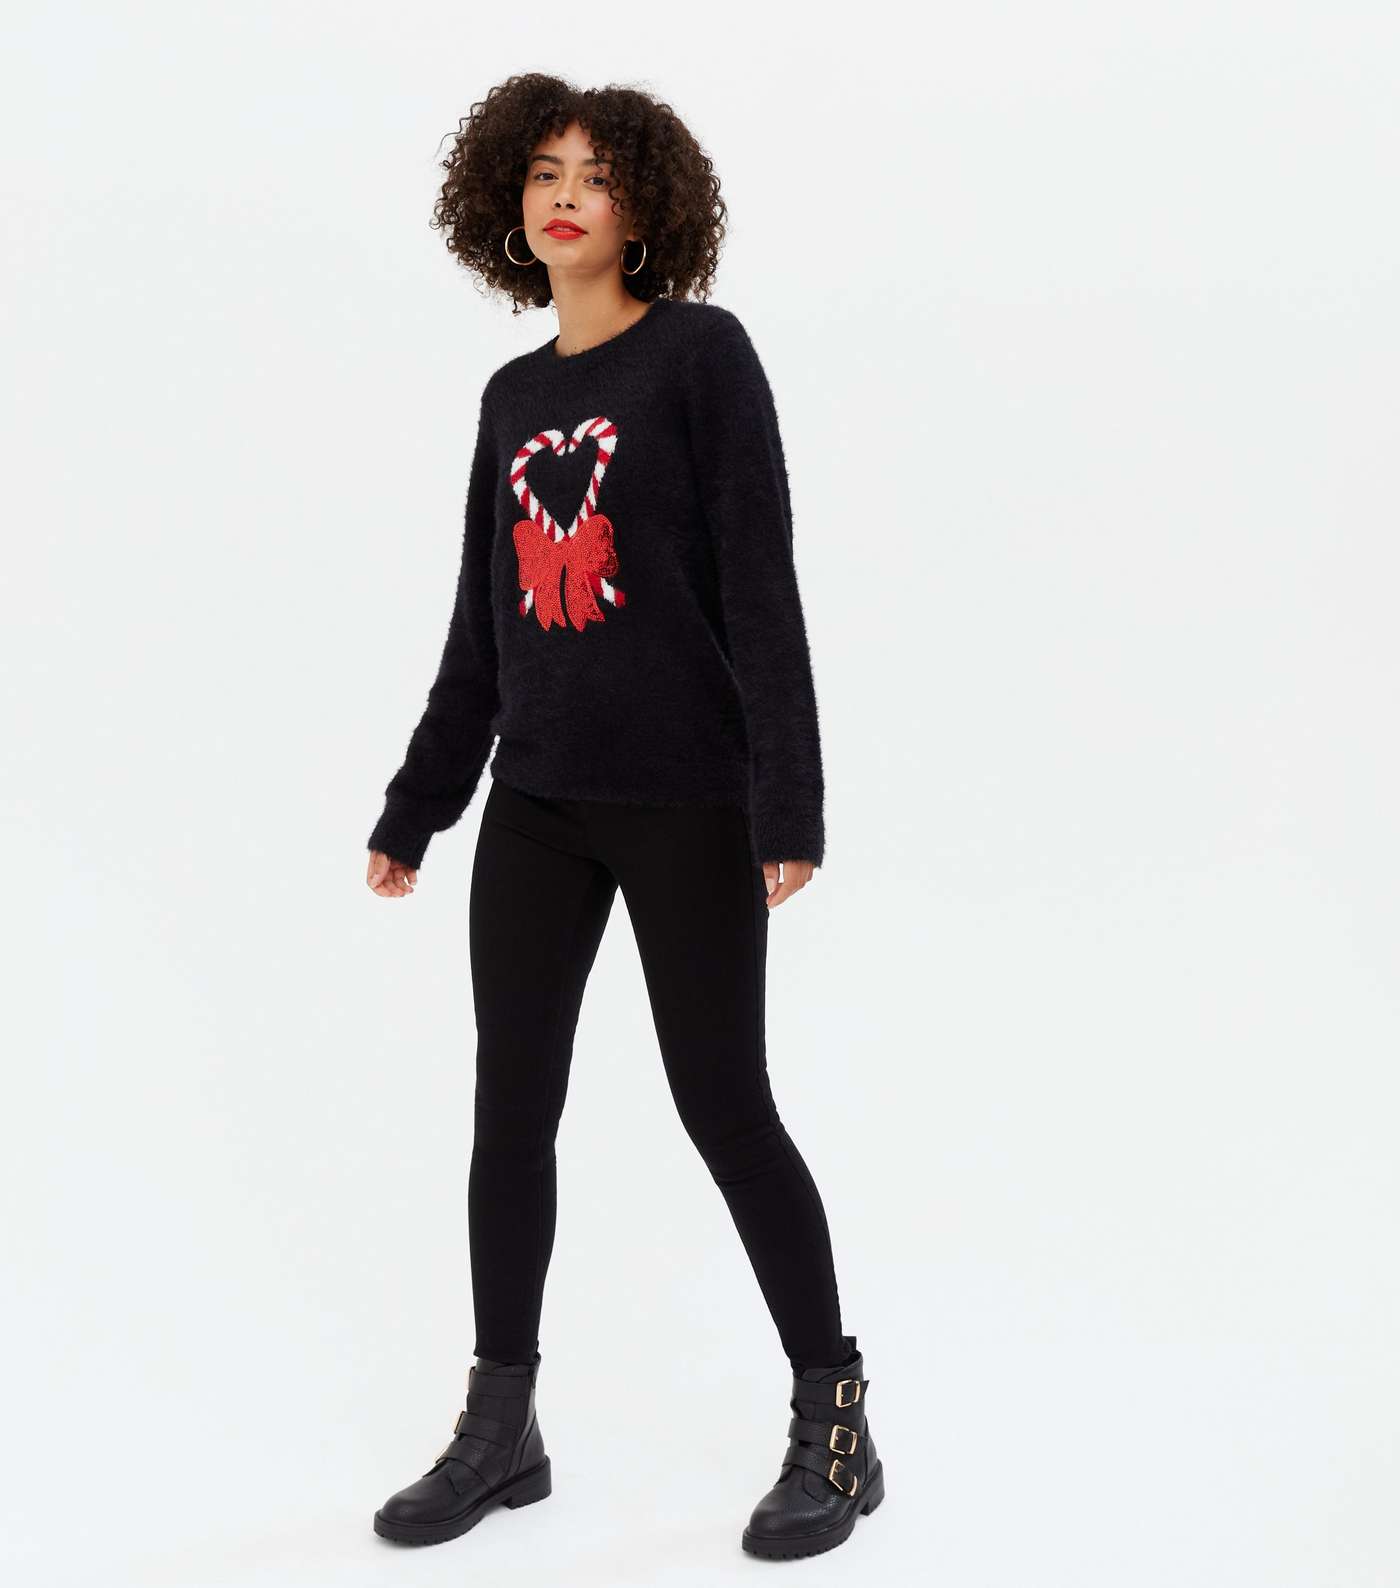 Tall Black Fluffy Candy Cane Christmas Jumper Image 2